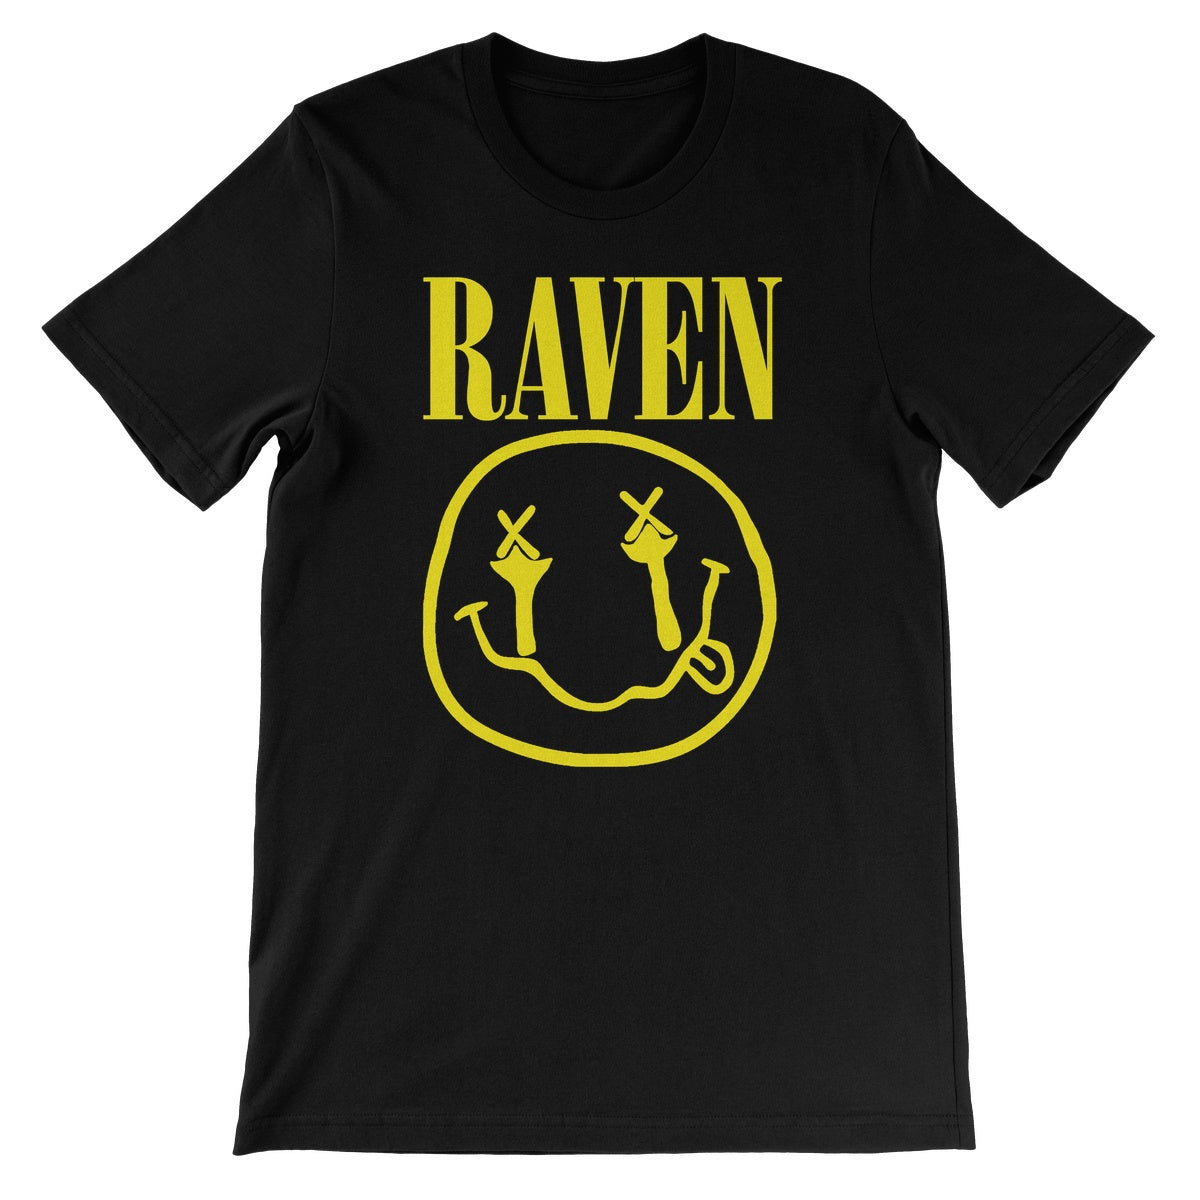 Raven Come As You Are Unisex Short Sleeve T-Shirt